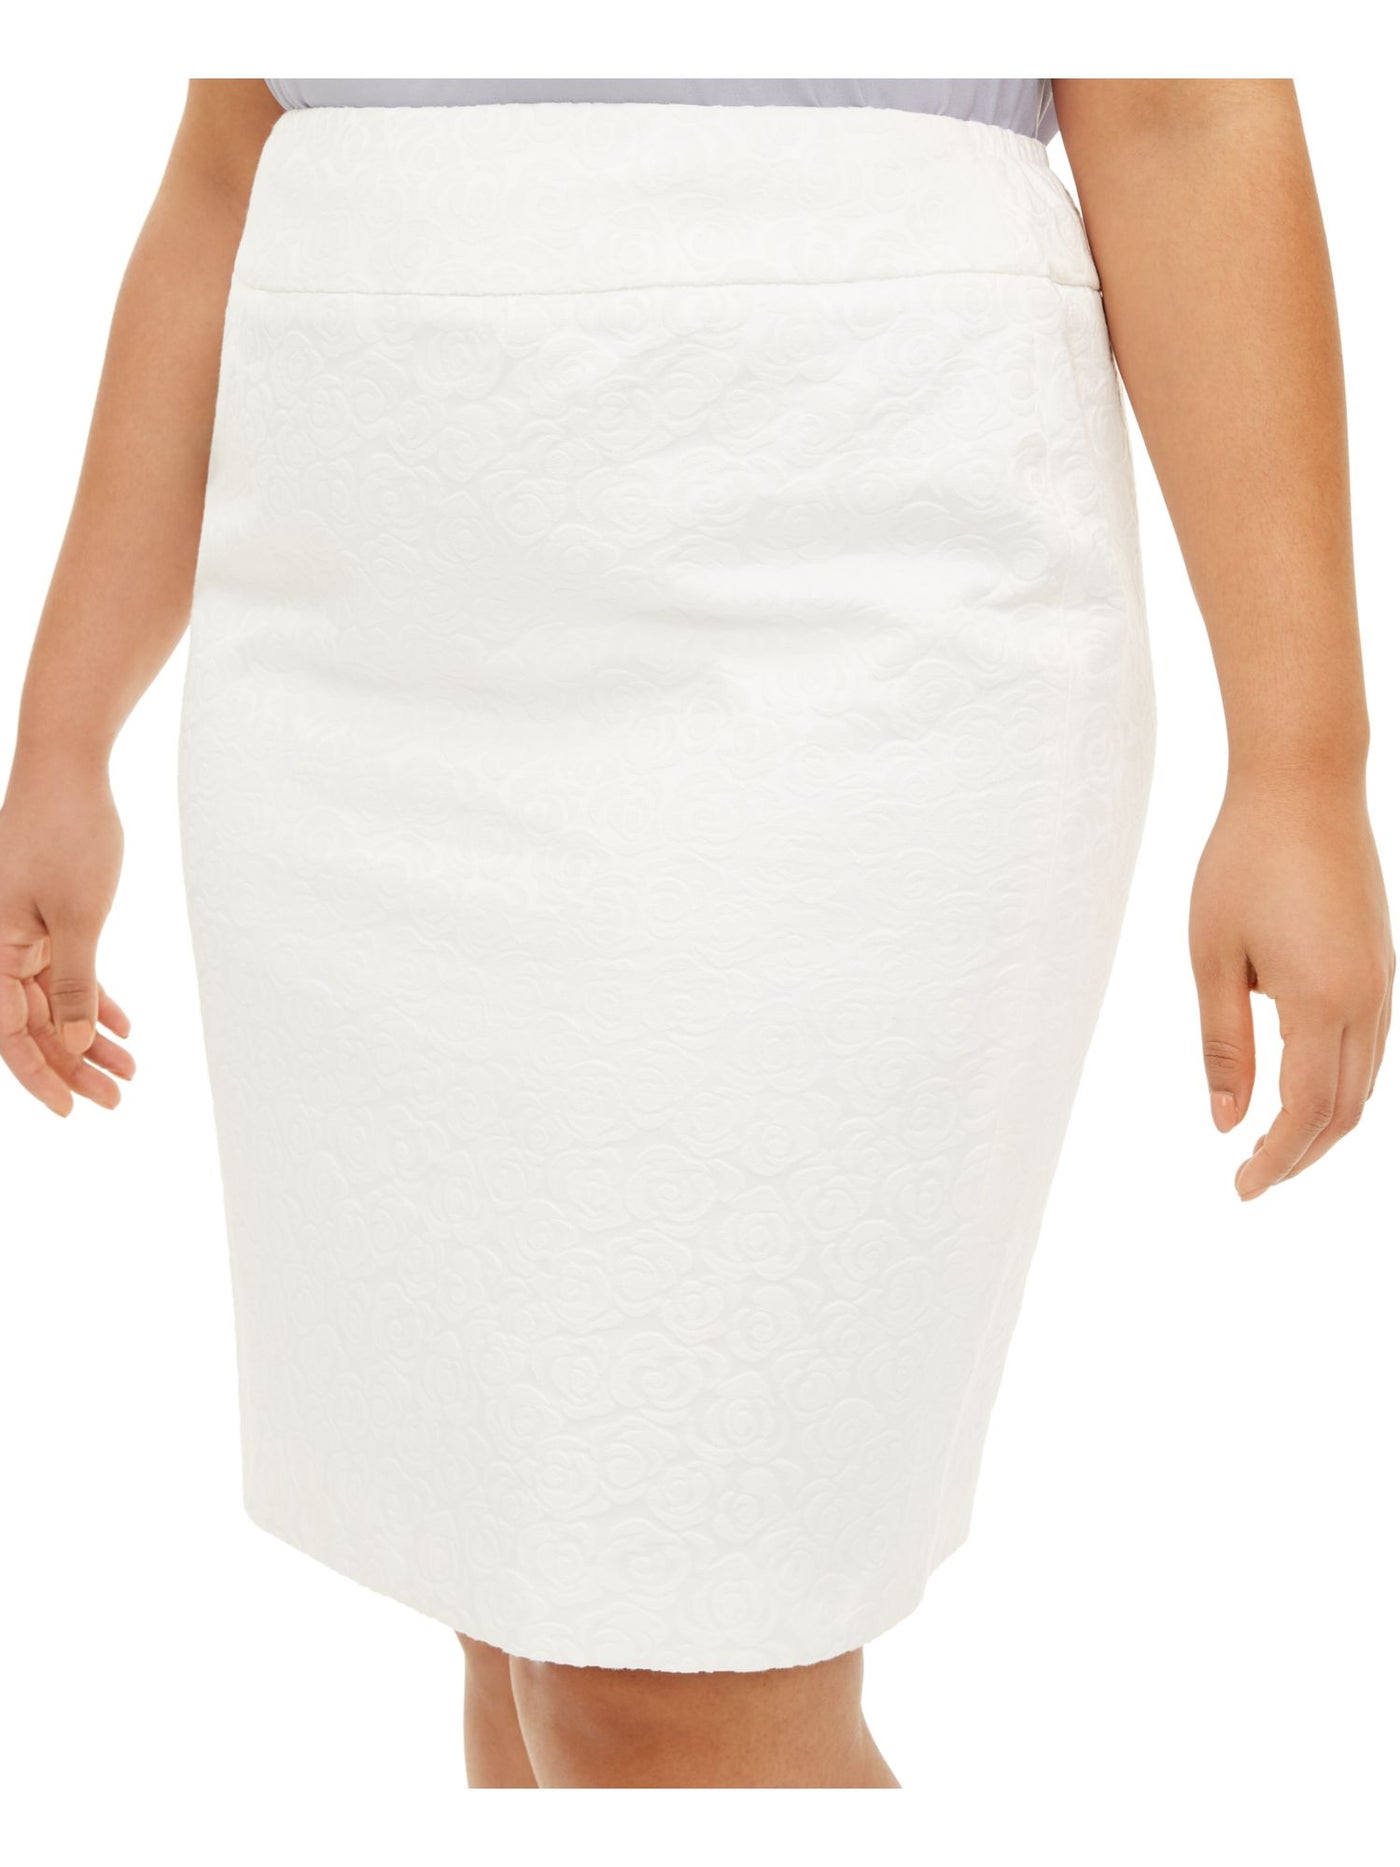 KASPER Womens White Cotton Zippered Printed Above The Knee Evening Pencil Skirt Plus 22W